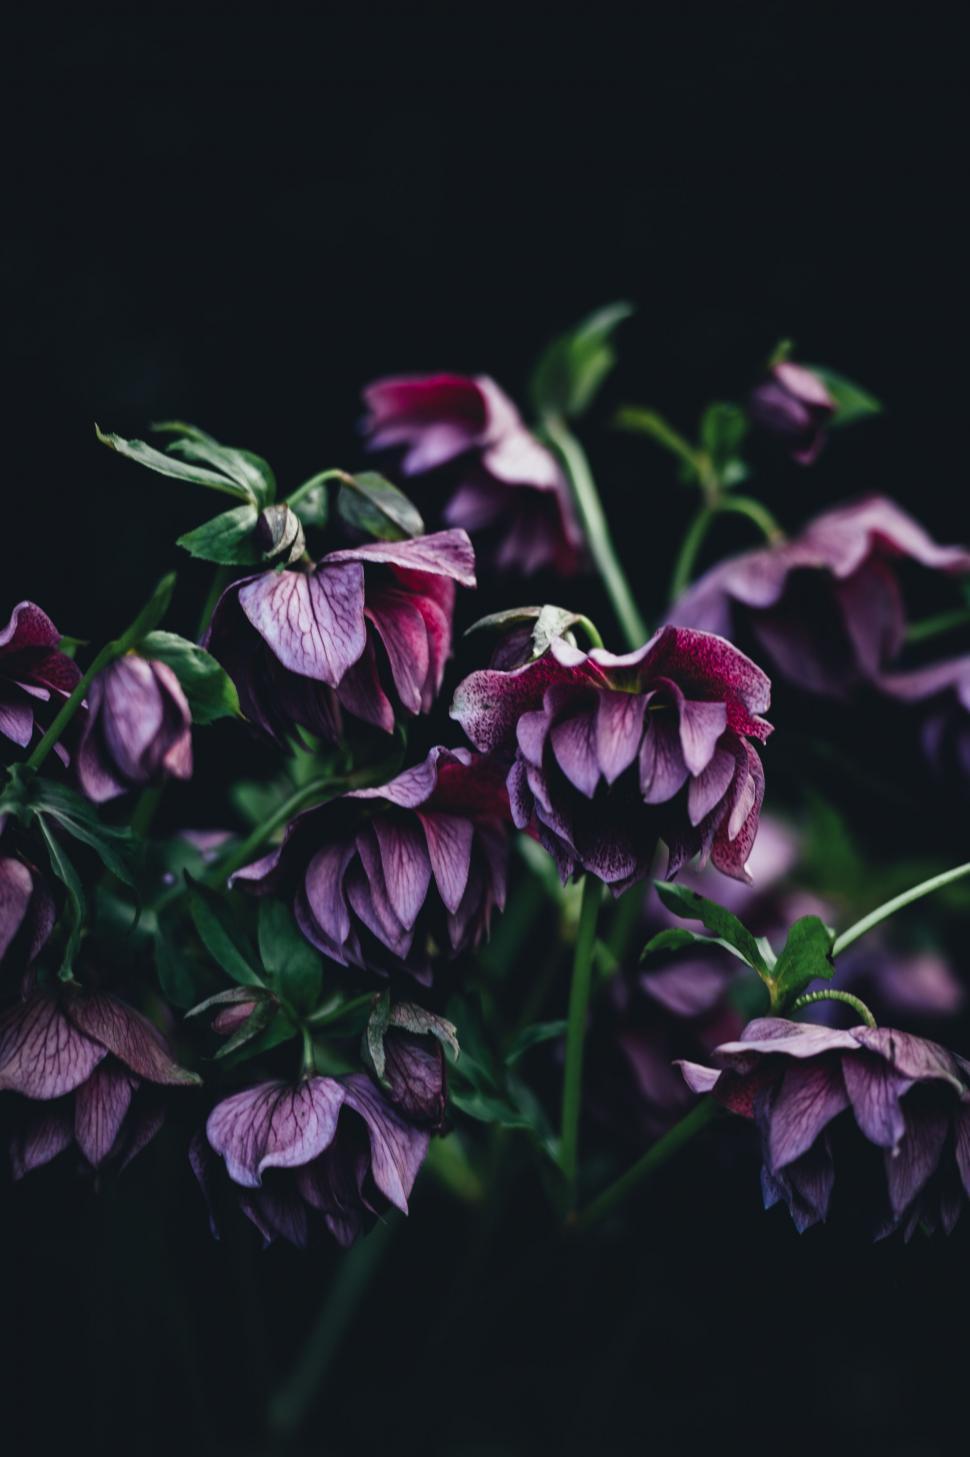 Free Image of Cluster of Purple Flowers Against Black Background 